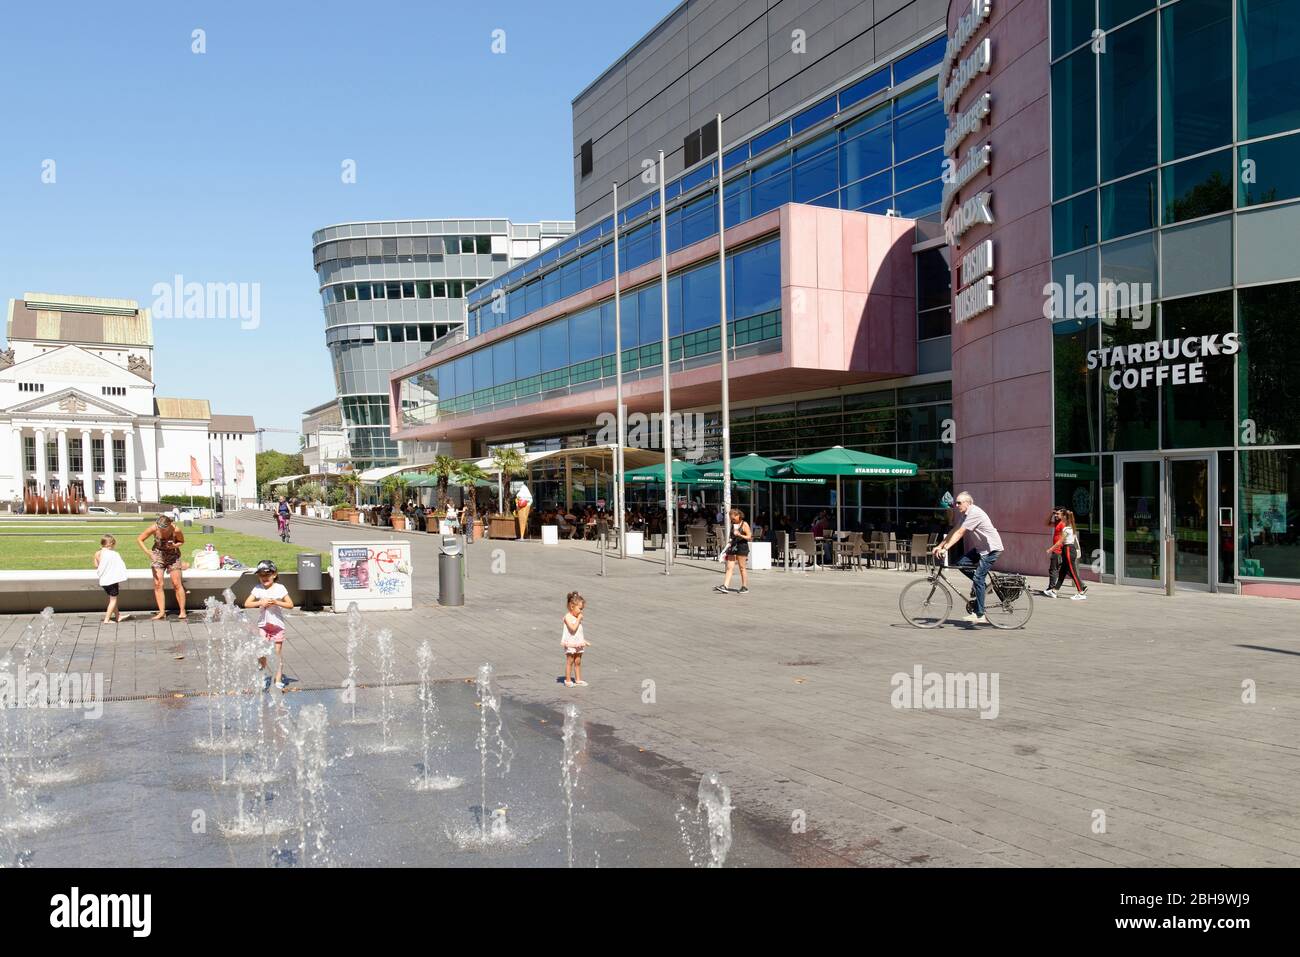 Fountain, City Palace and City Theater in the pedestrian area at König-Heinrich Platz, Duisburg, North Rhine-Westphalia, Germany Stock Photo